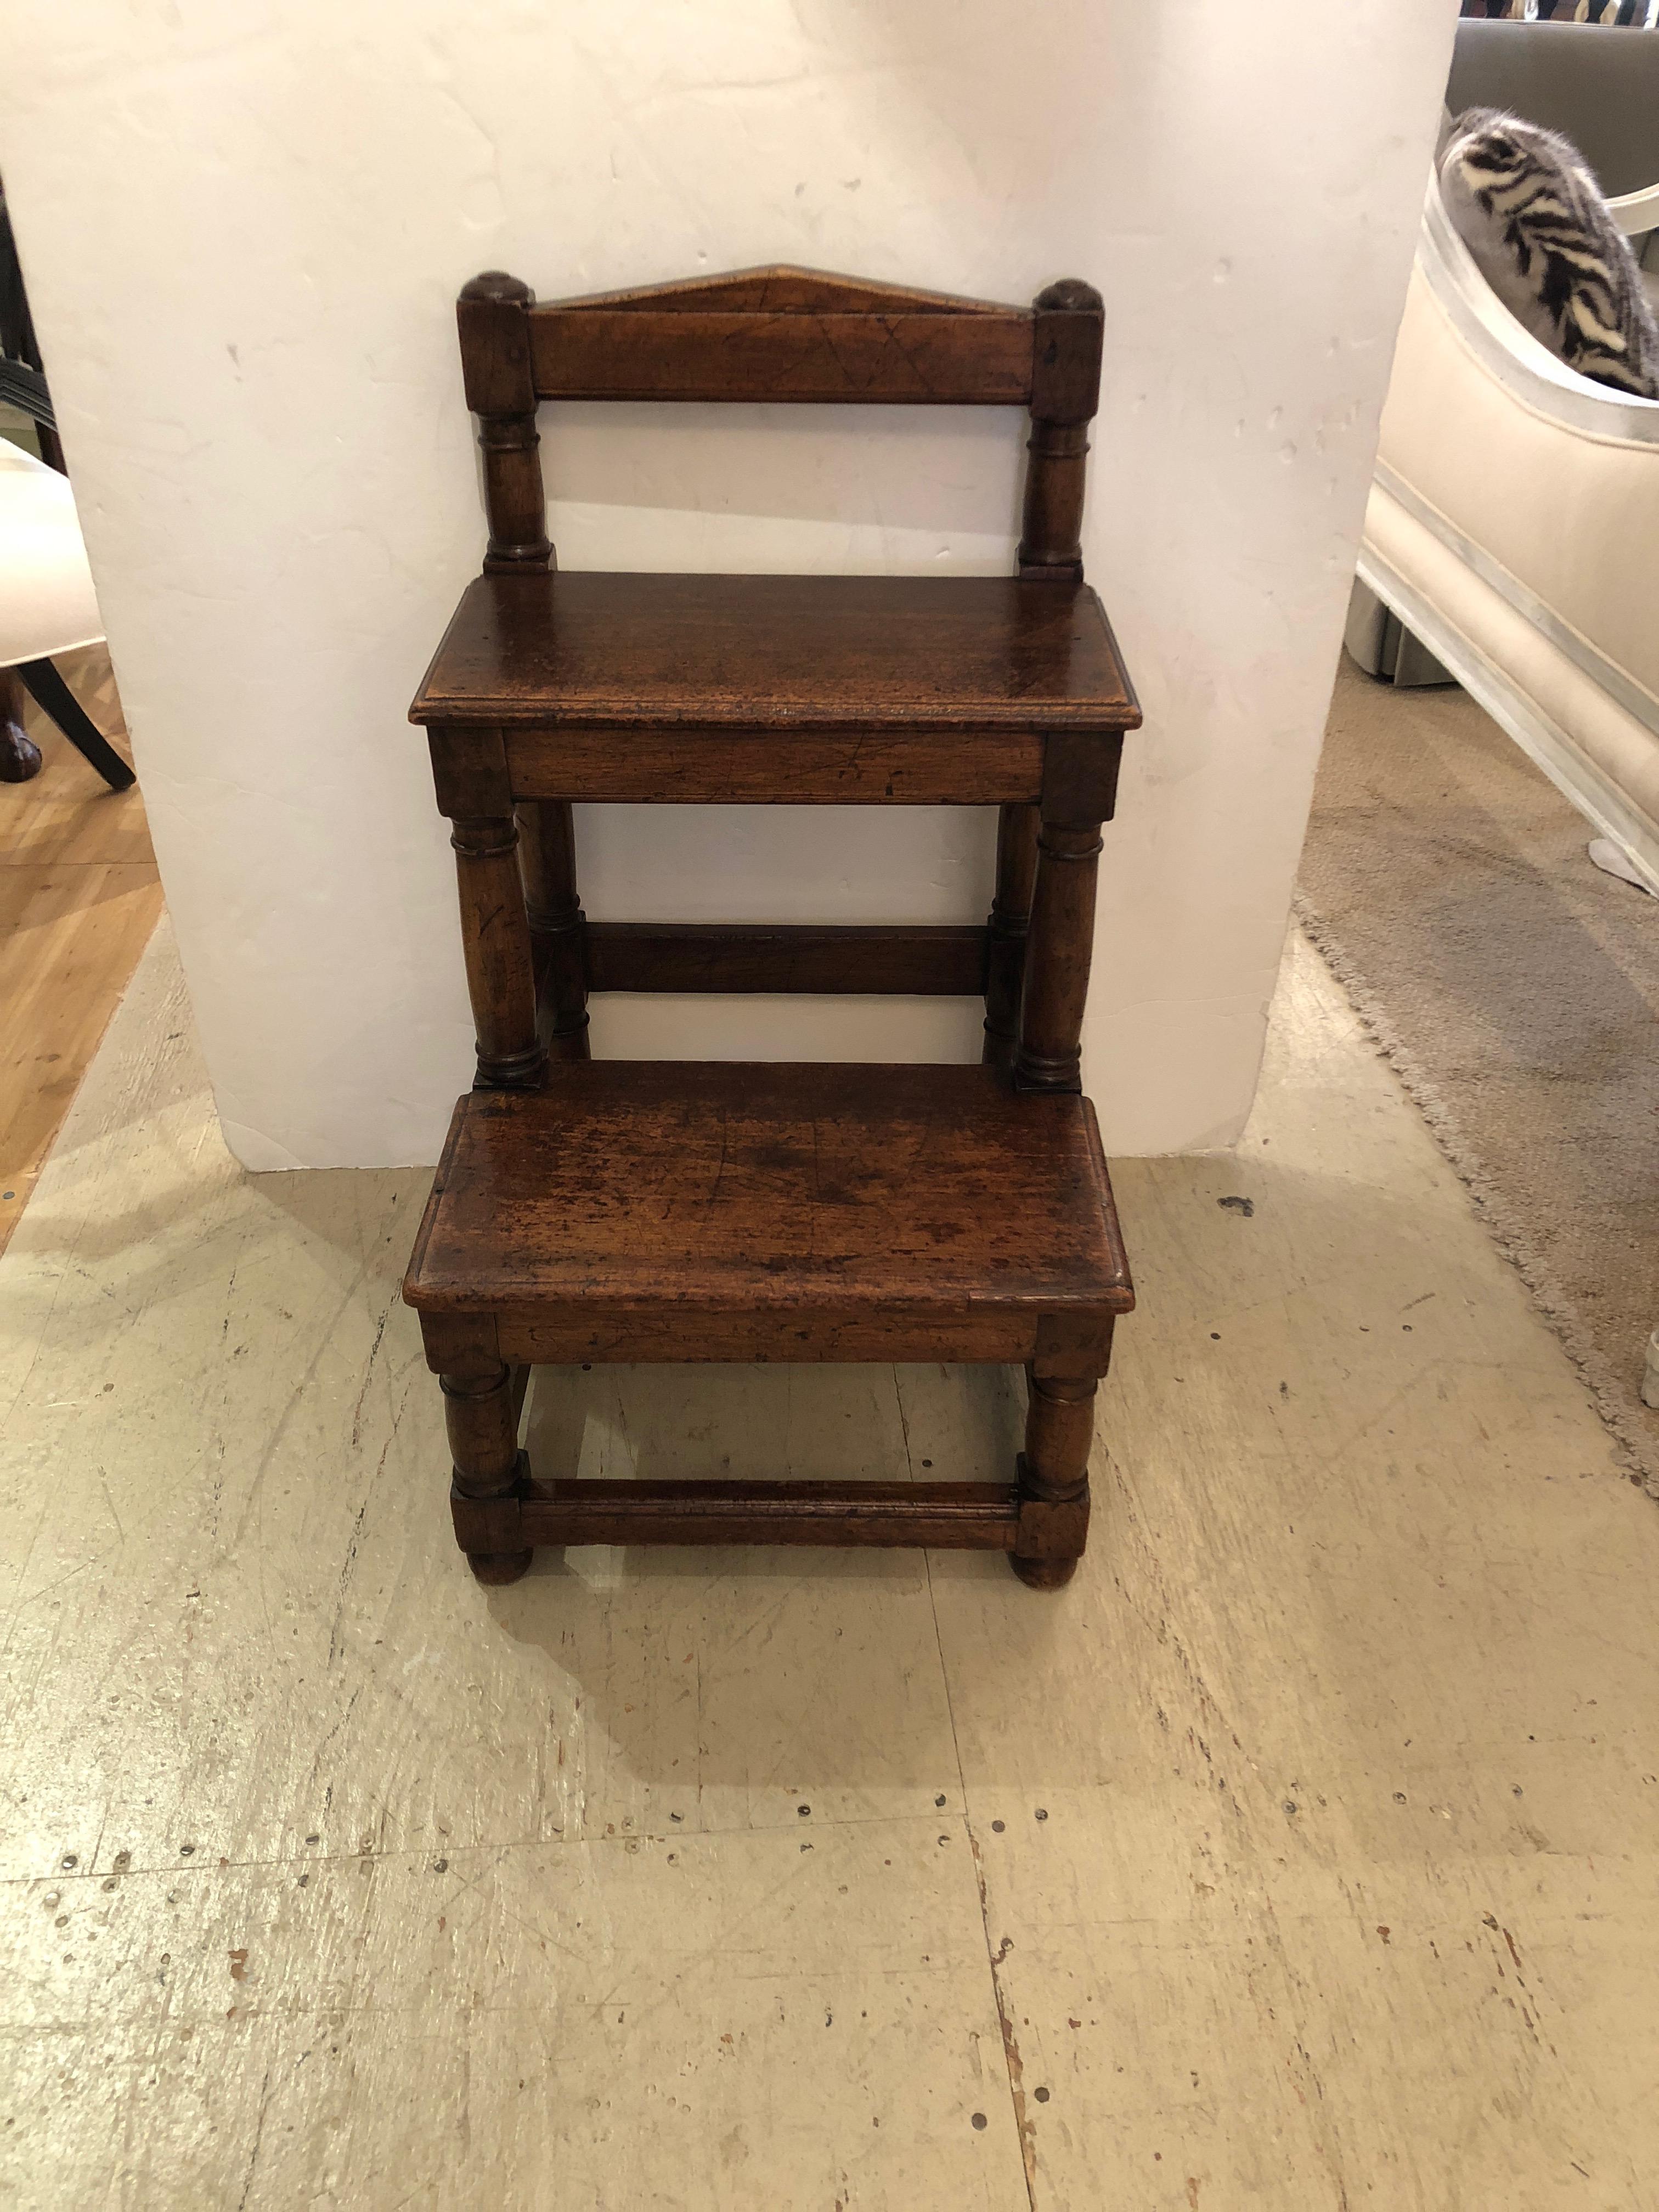 Wonderful antique English fruitwood library steps having two solid risers and substantial pegged construction.